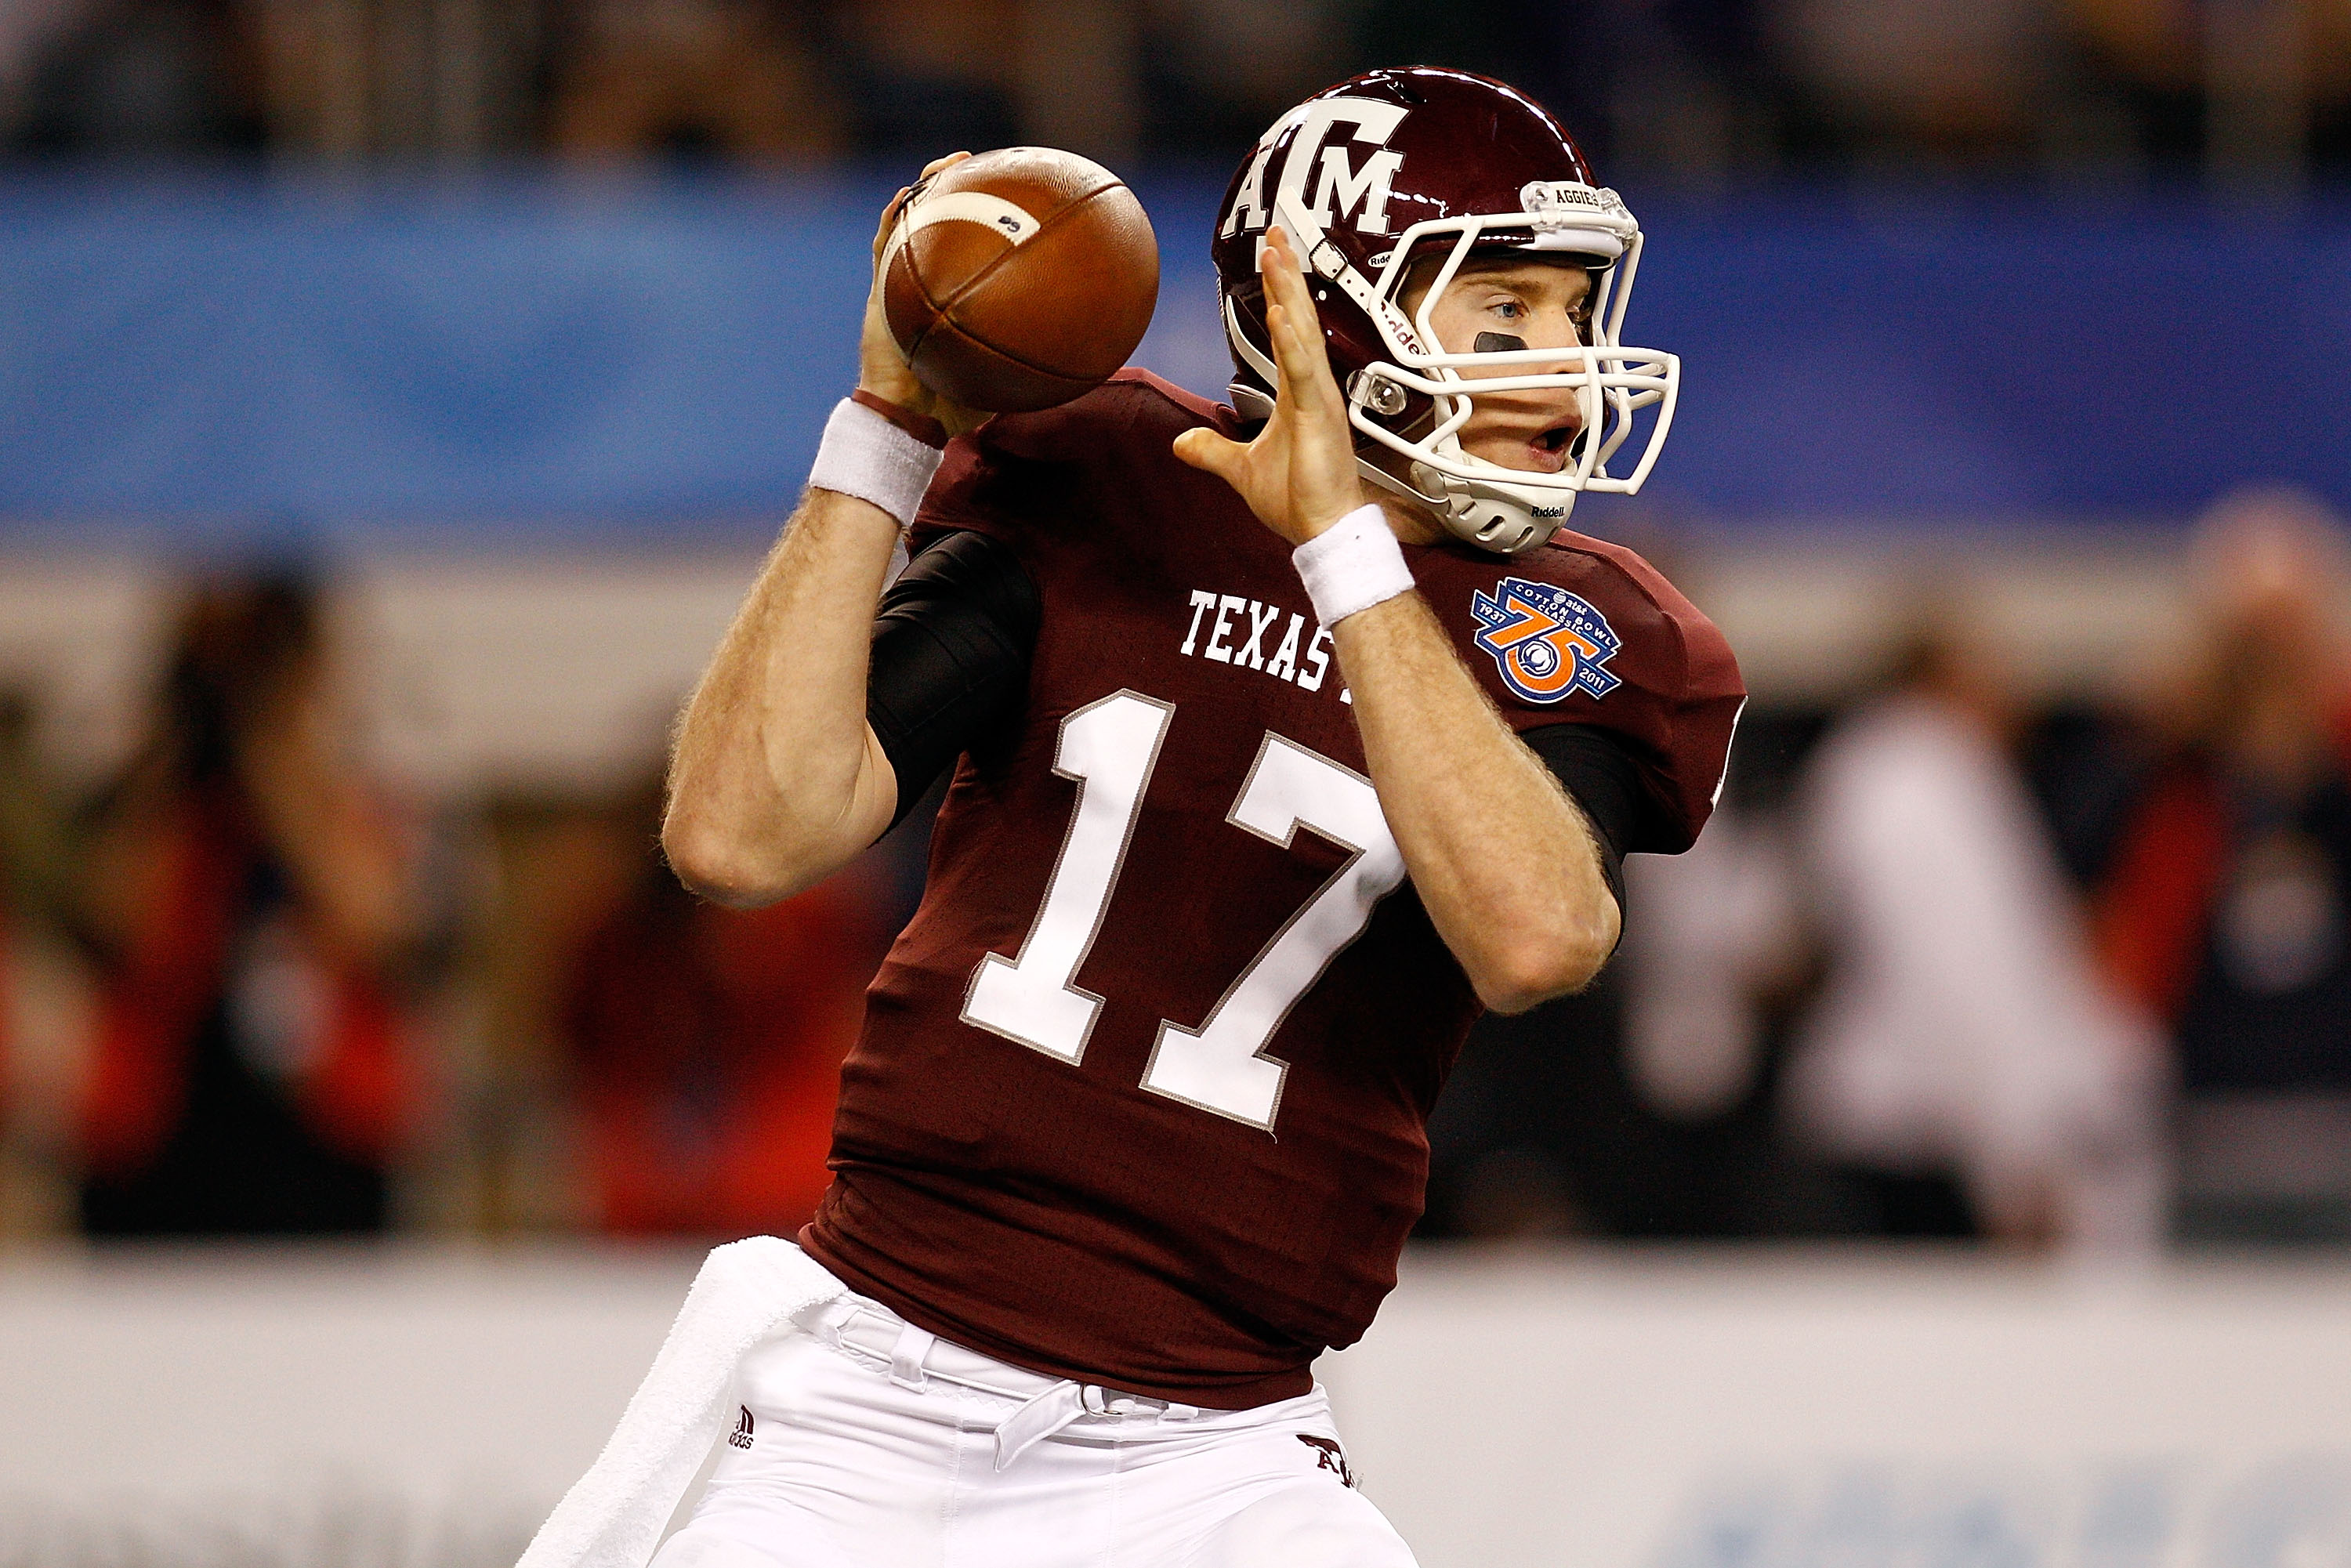 ARLINGTON, TX - JANUARY 07:  Quarterback Ryan Tannehill #17 of the Texas A&M Aggies looks to throw a pass against the Louisiana State University Tigers during the AT&T Cotton Bowl at Cowboys Stadium on January 7, 2011 in Arlington, Texas.  (Photo by Chris